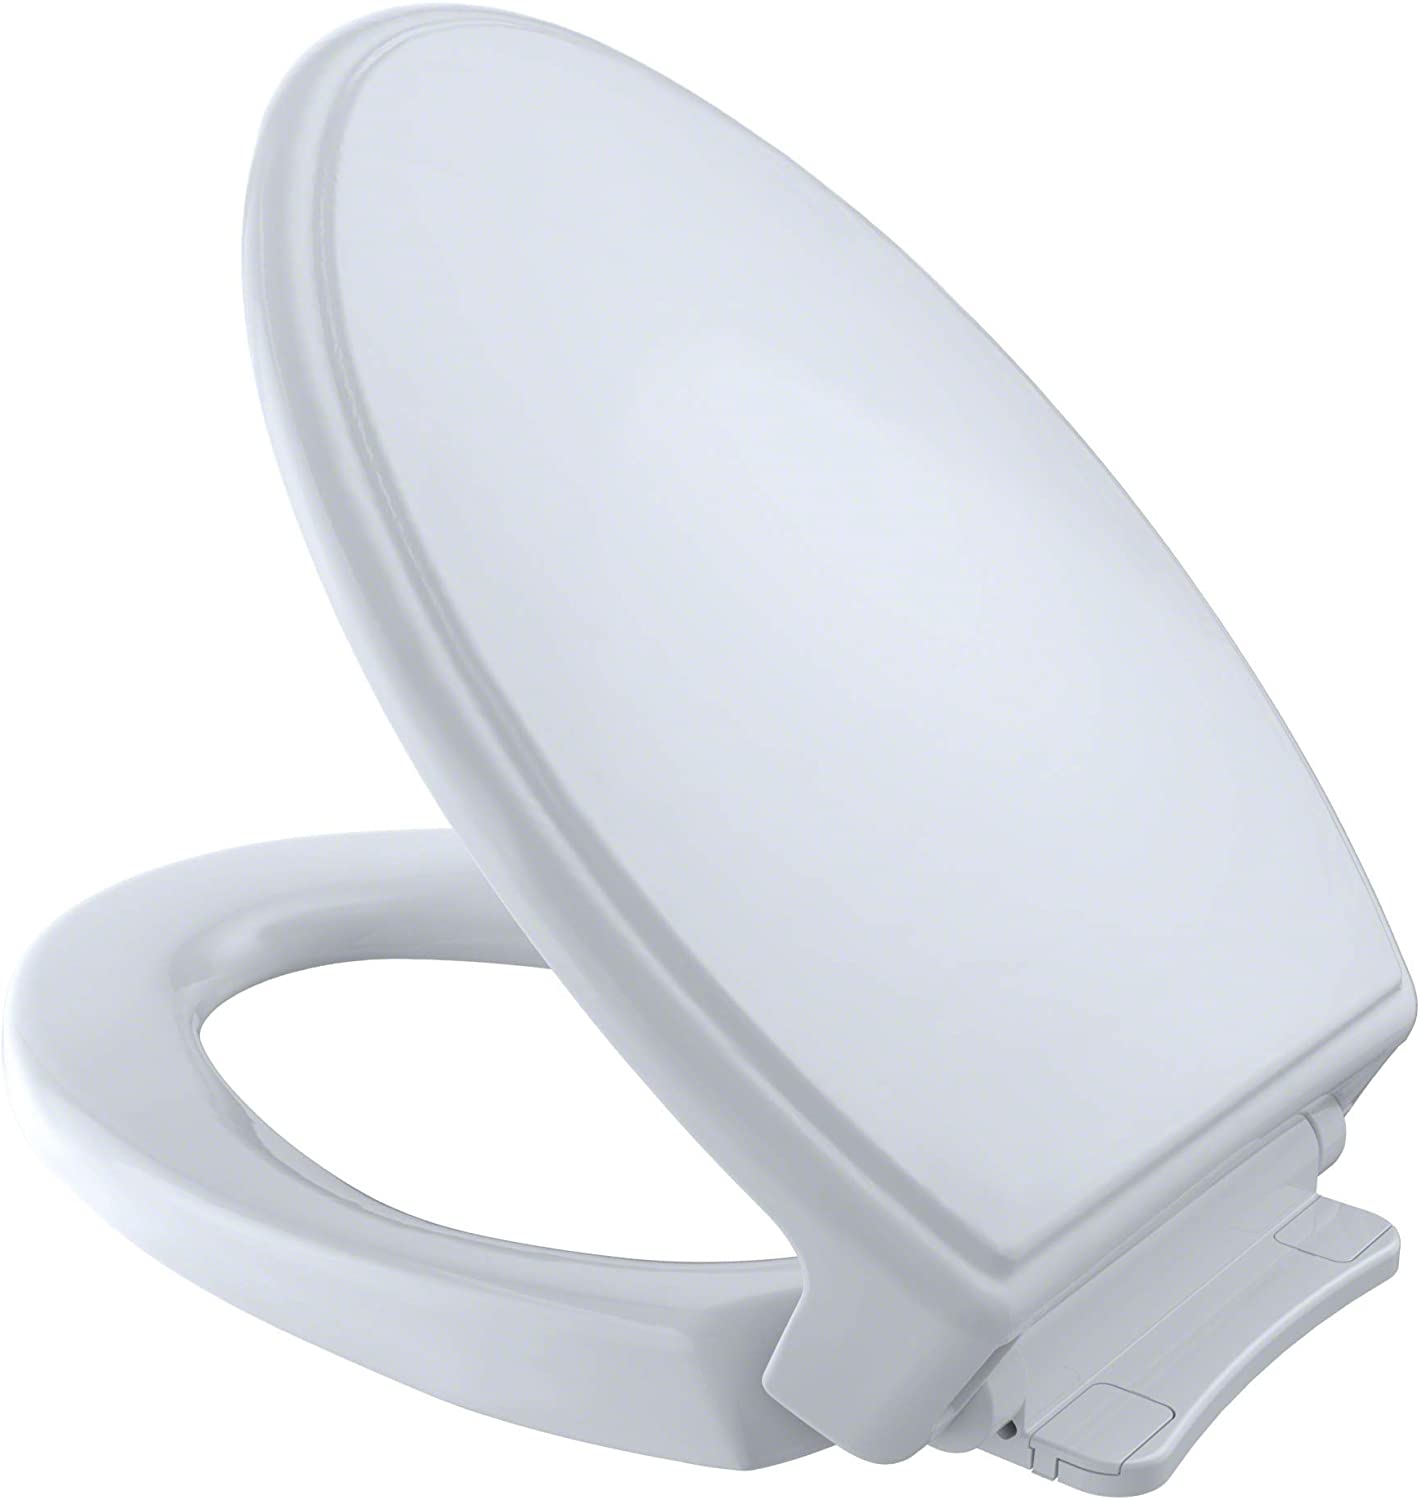 TOTO SS154#01 Traditional SoftClose Elongated Toilet Seat